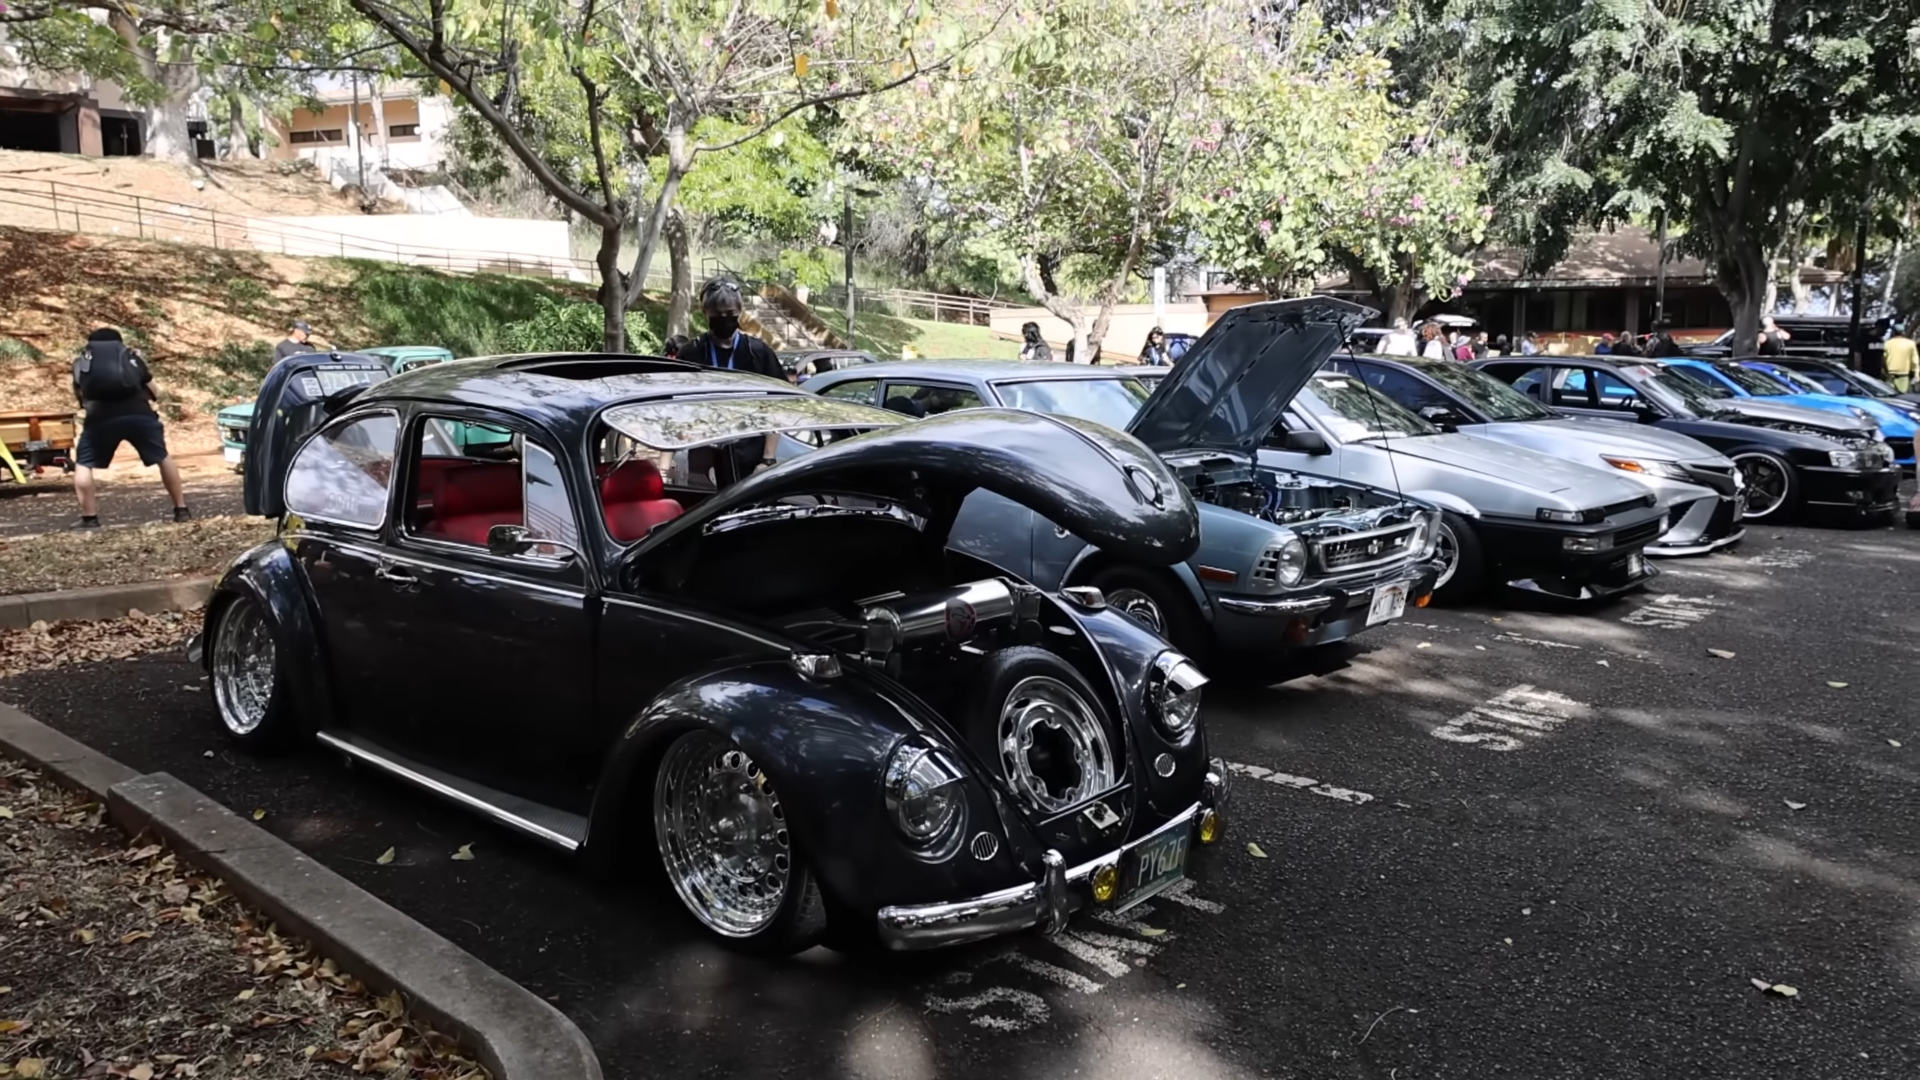 Hawaii car culture with Larry Chen